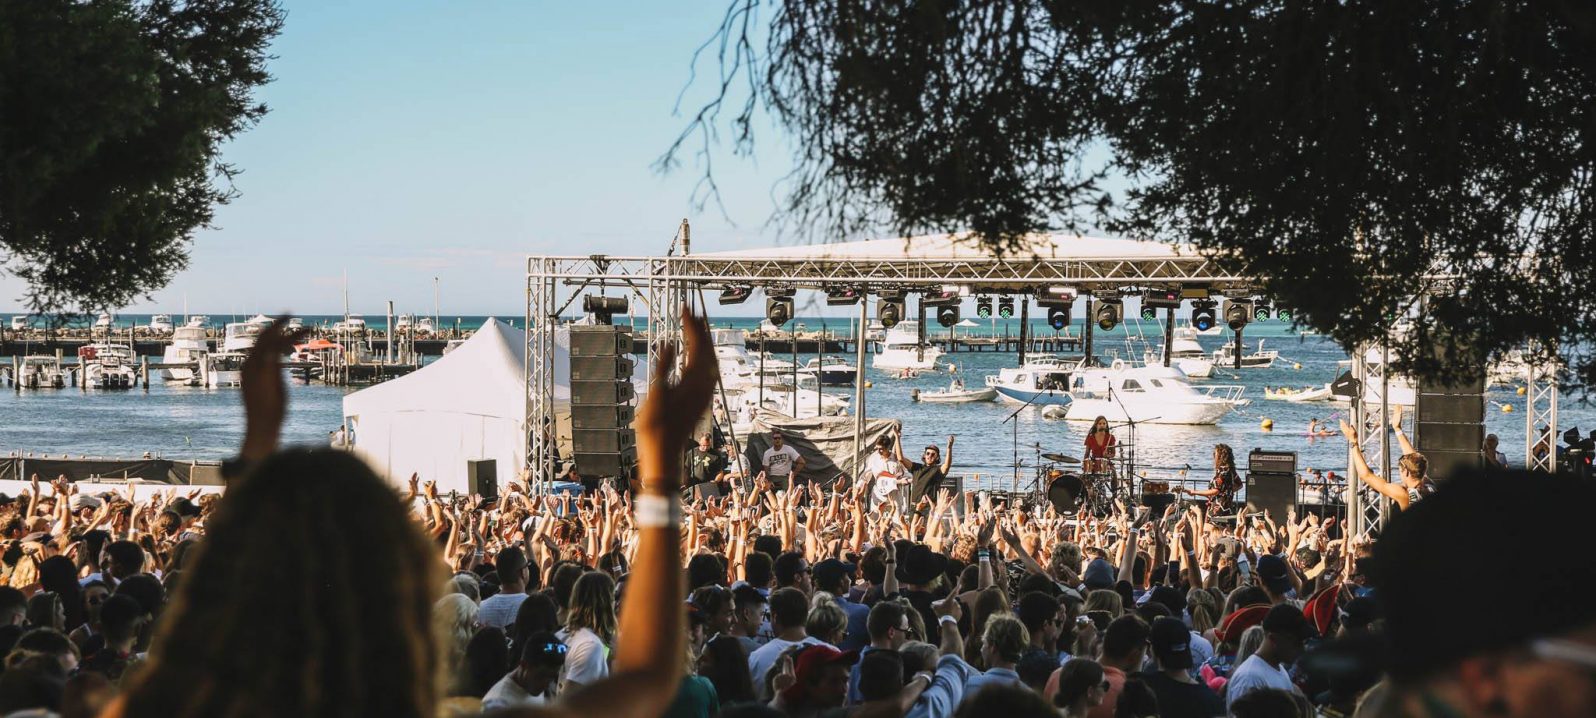 A crowd sings along and cheers at a musical festival on Rottnest Island